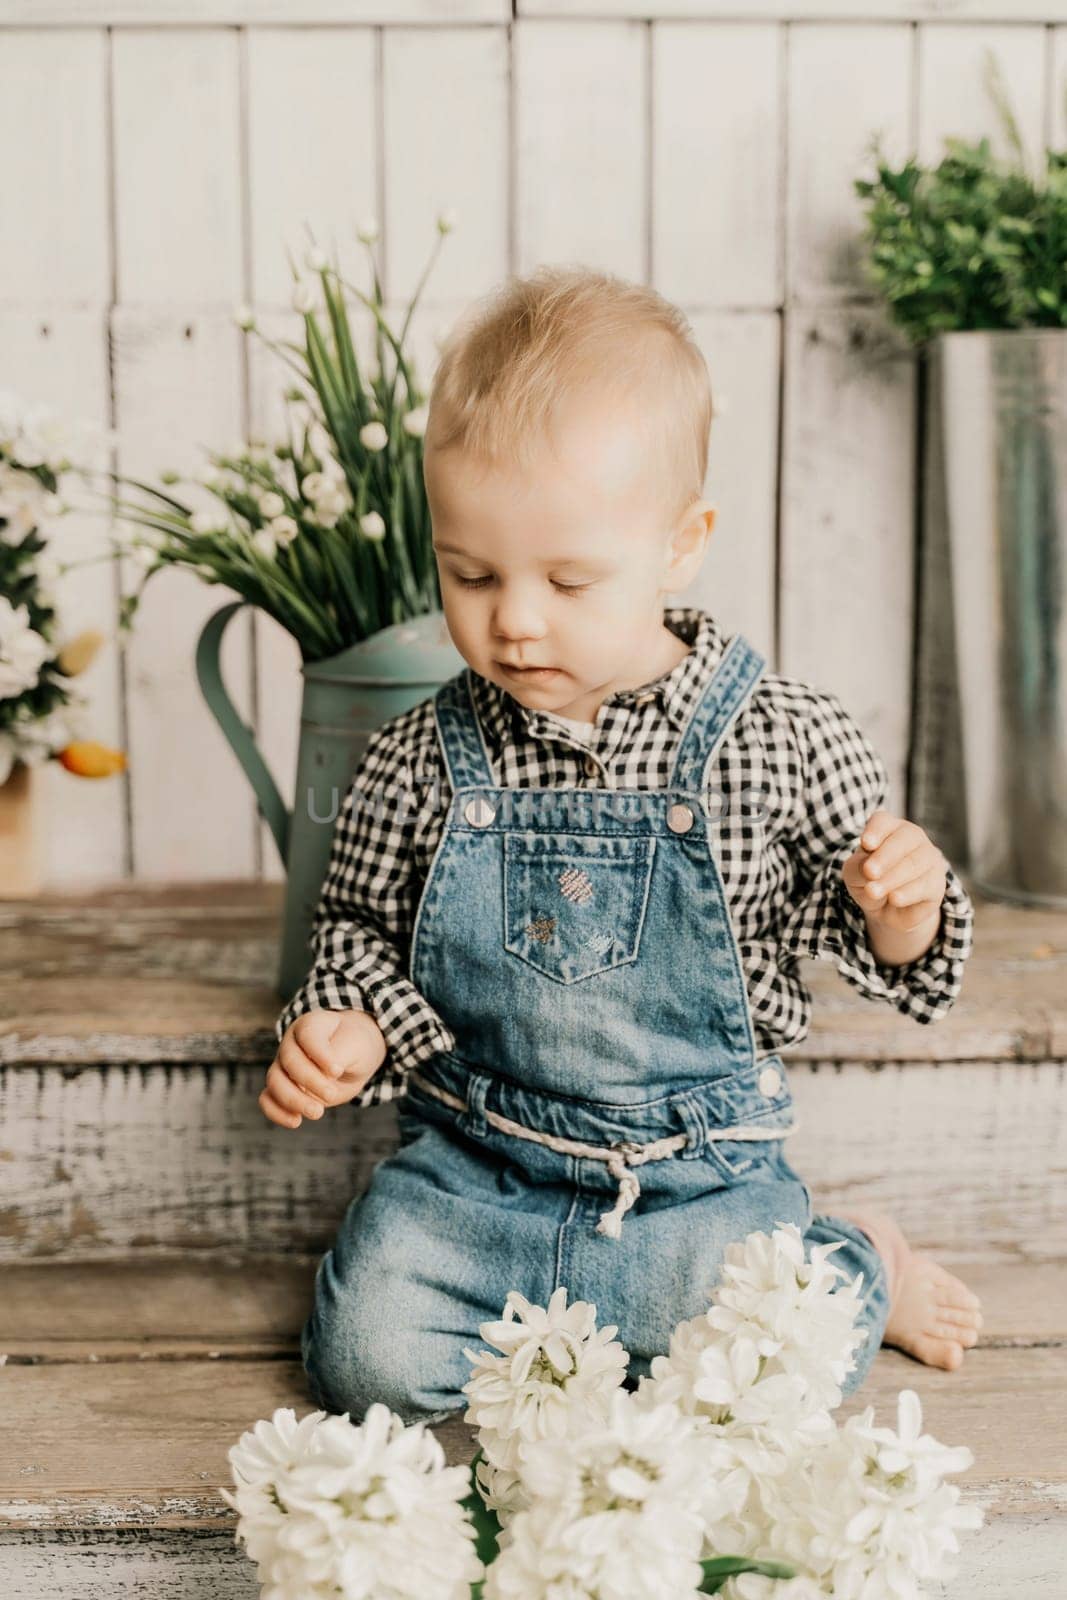 Girl 1 year old. sits holding a white hyacinth with a bulb in her hands, she is dressed in a plaid shirt and denim overalls on a wooden background with green plants in pots